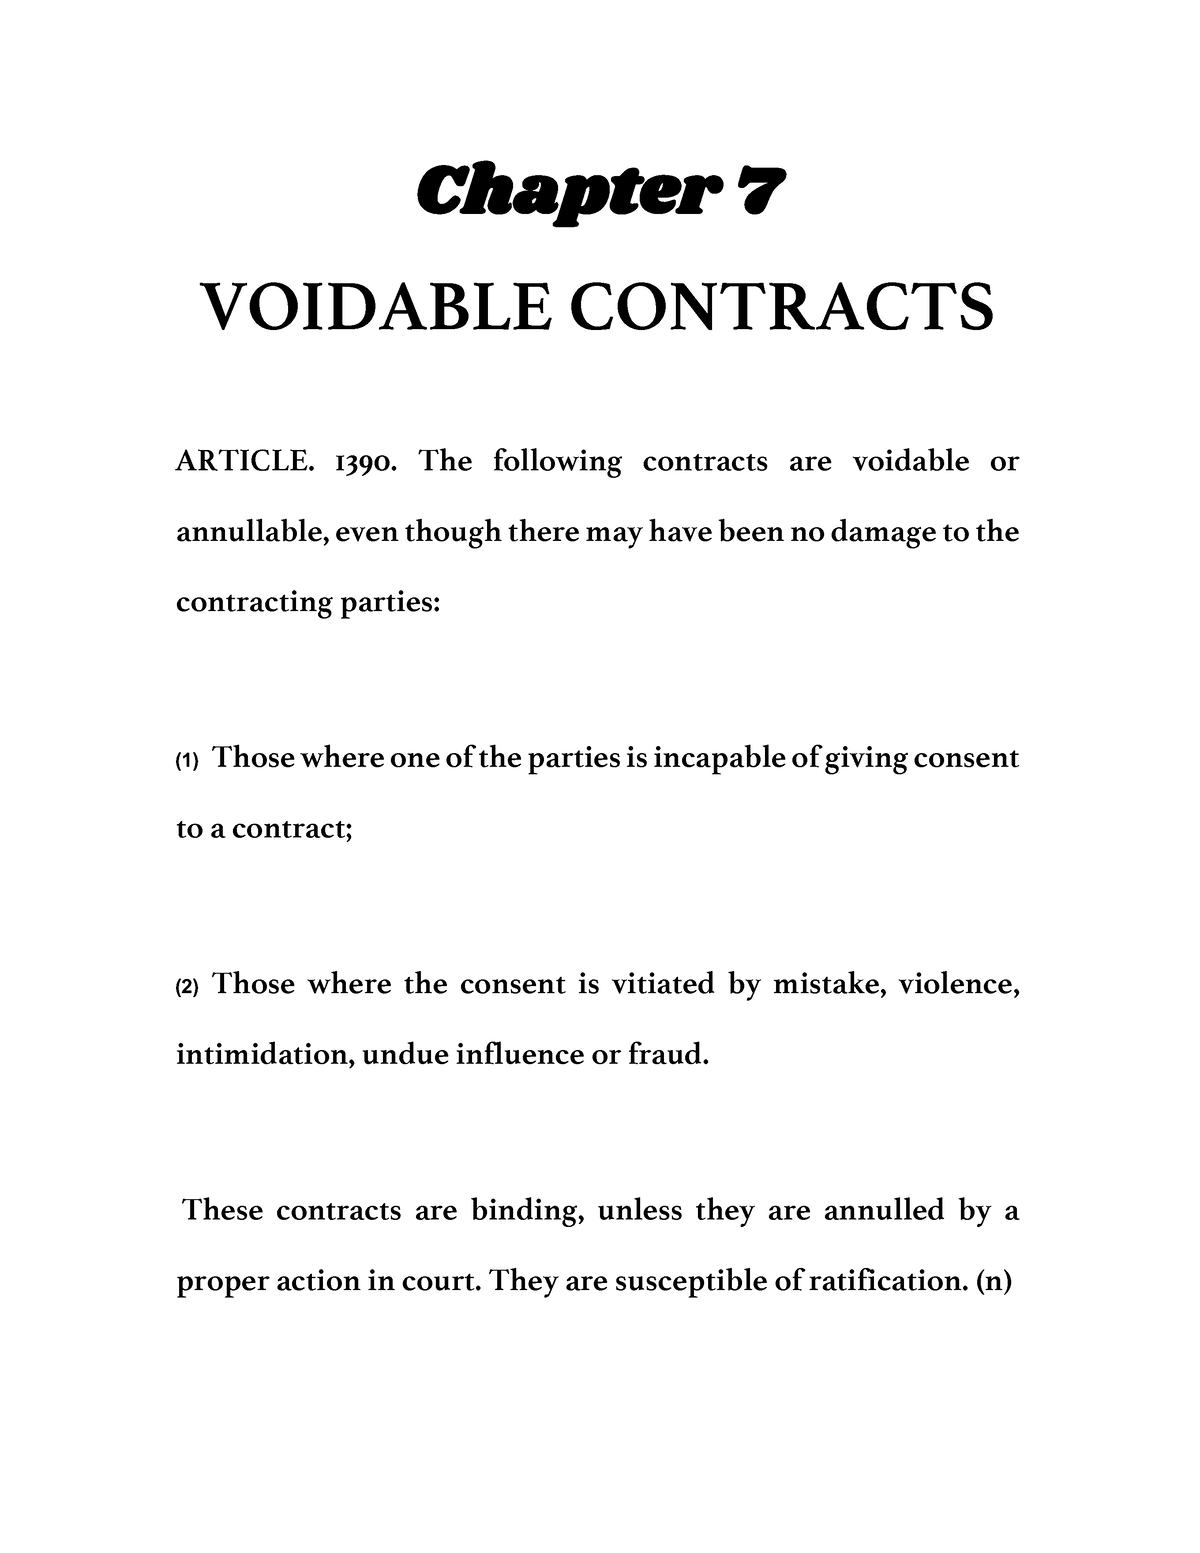 assignment of voidable contract